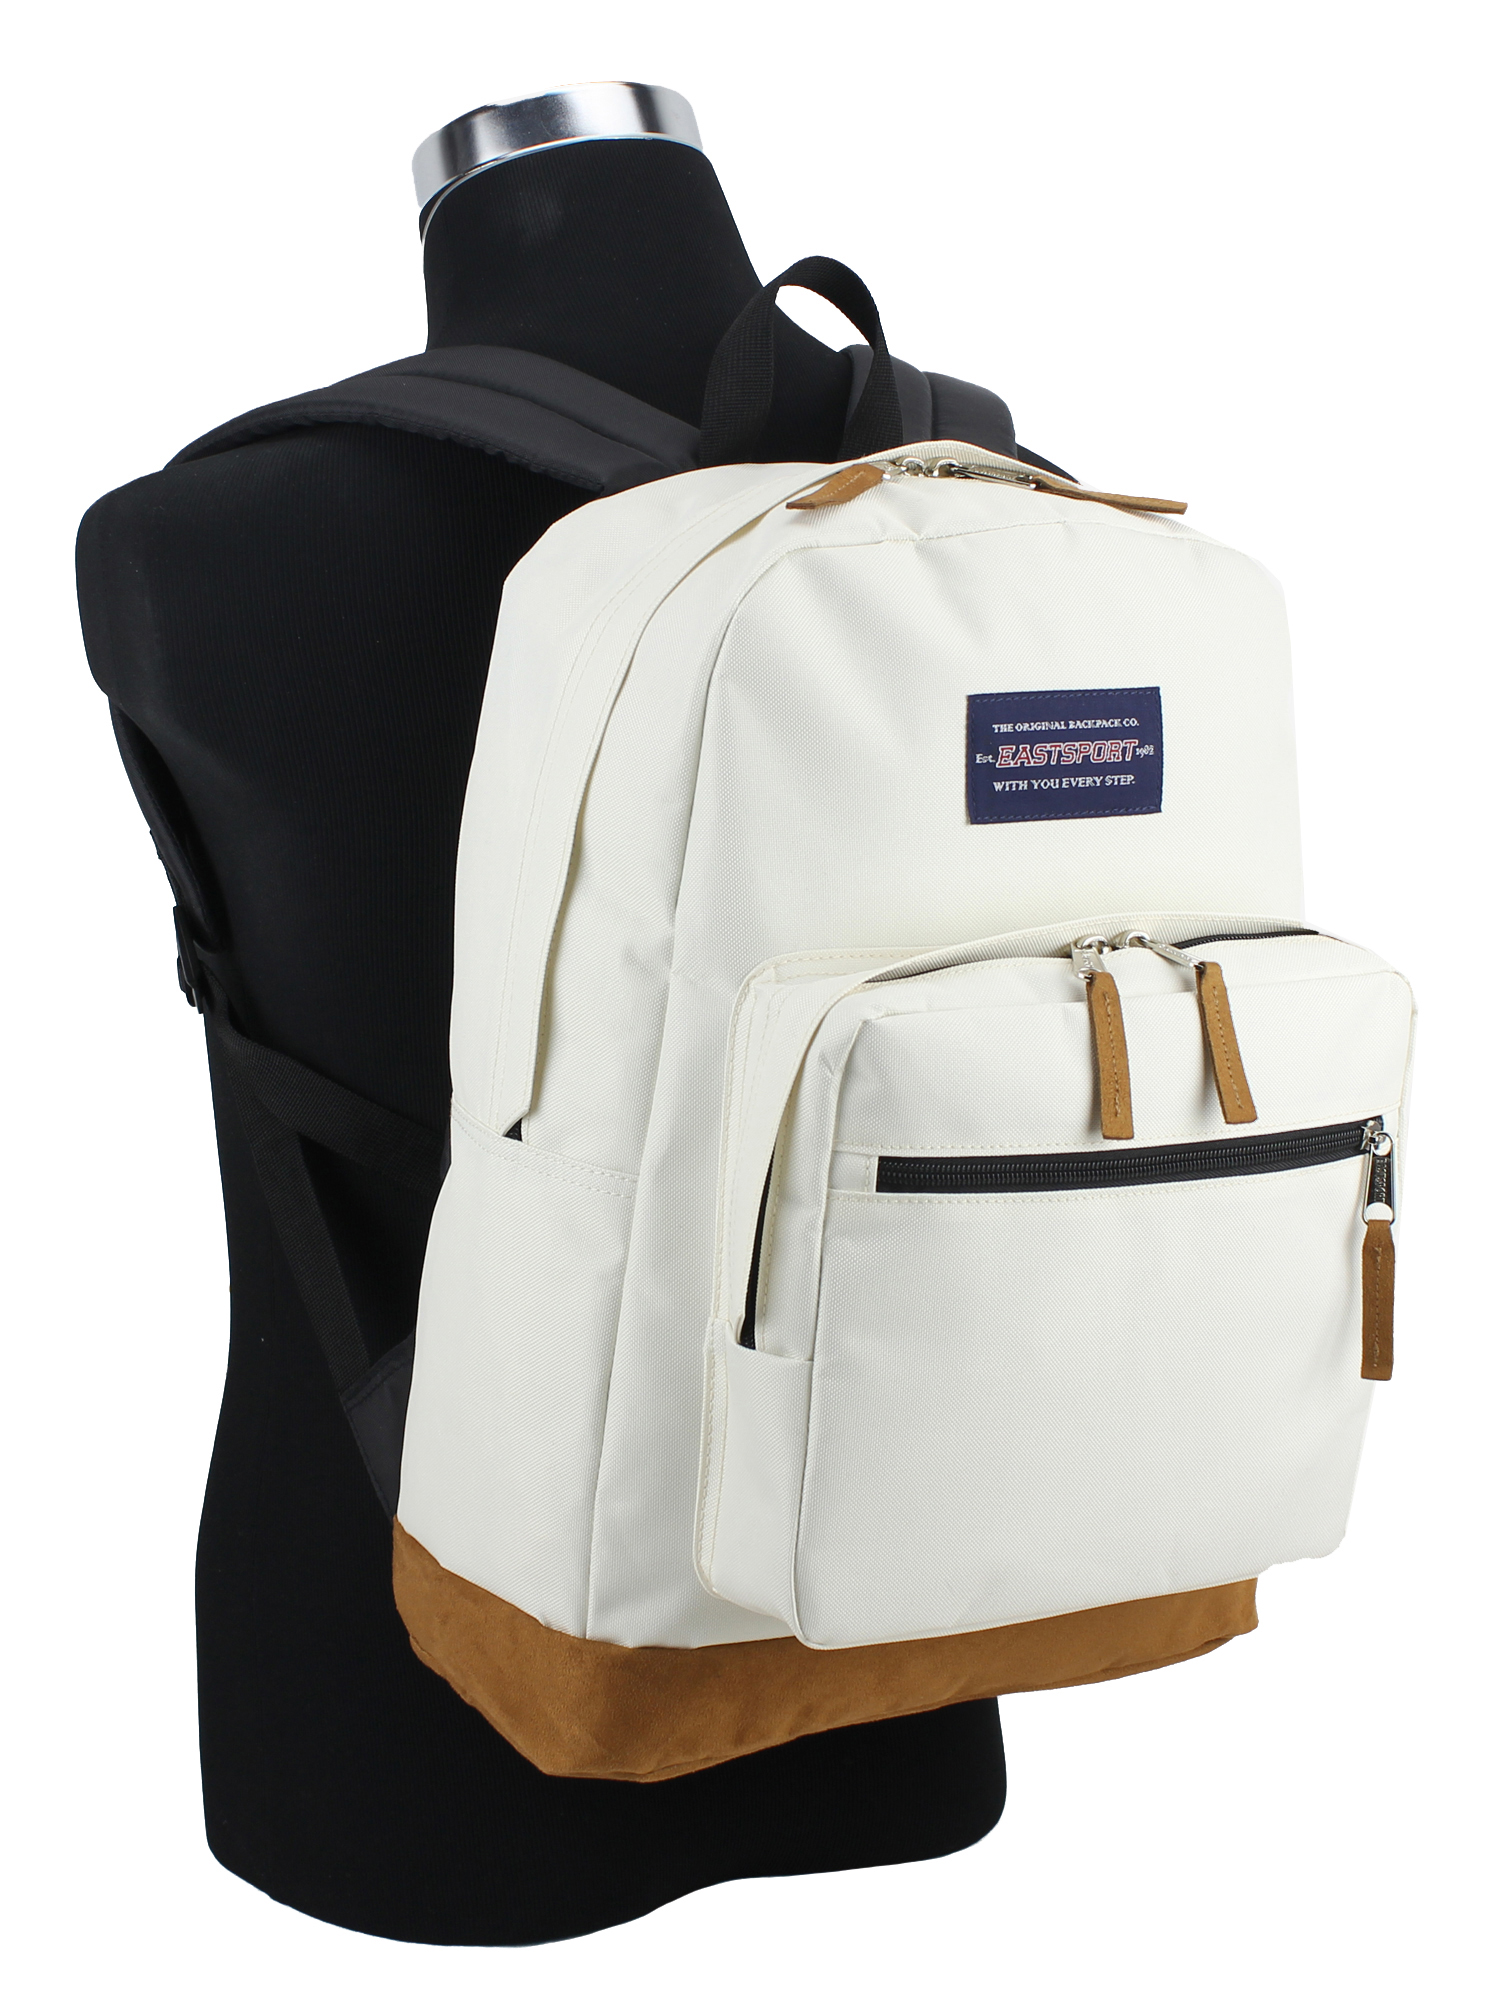 Eastsport Power Tech Backpack with External USB Charging Port - image 4 of 4